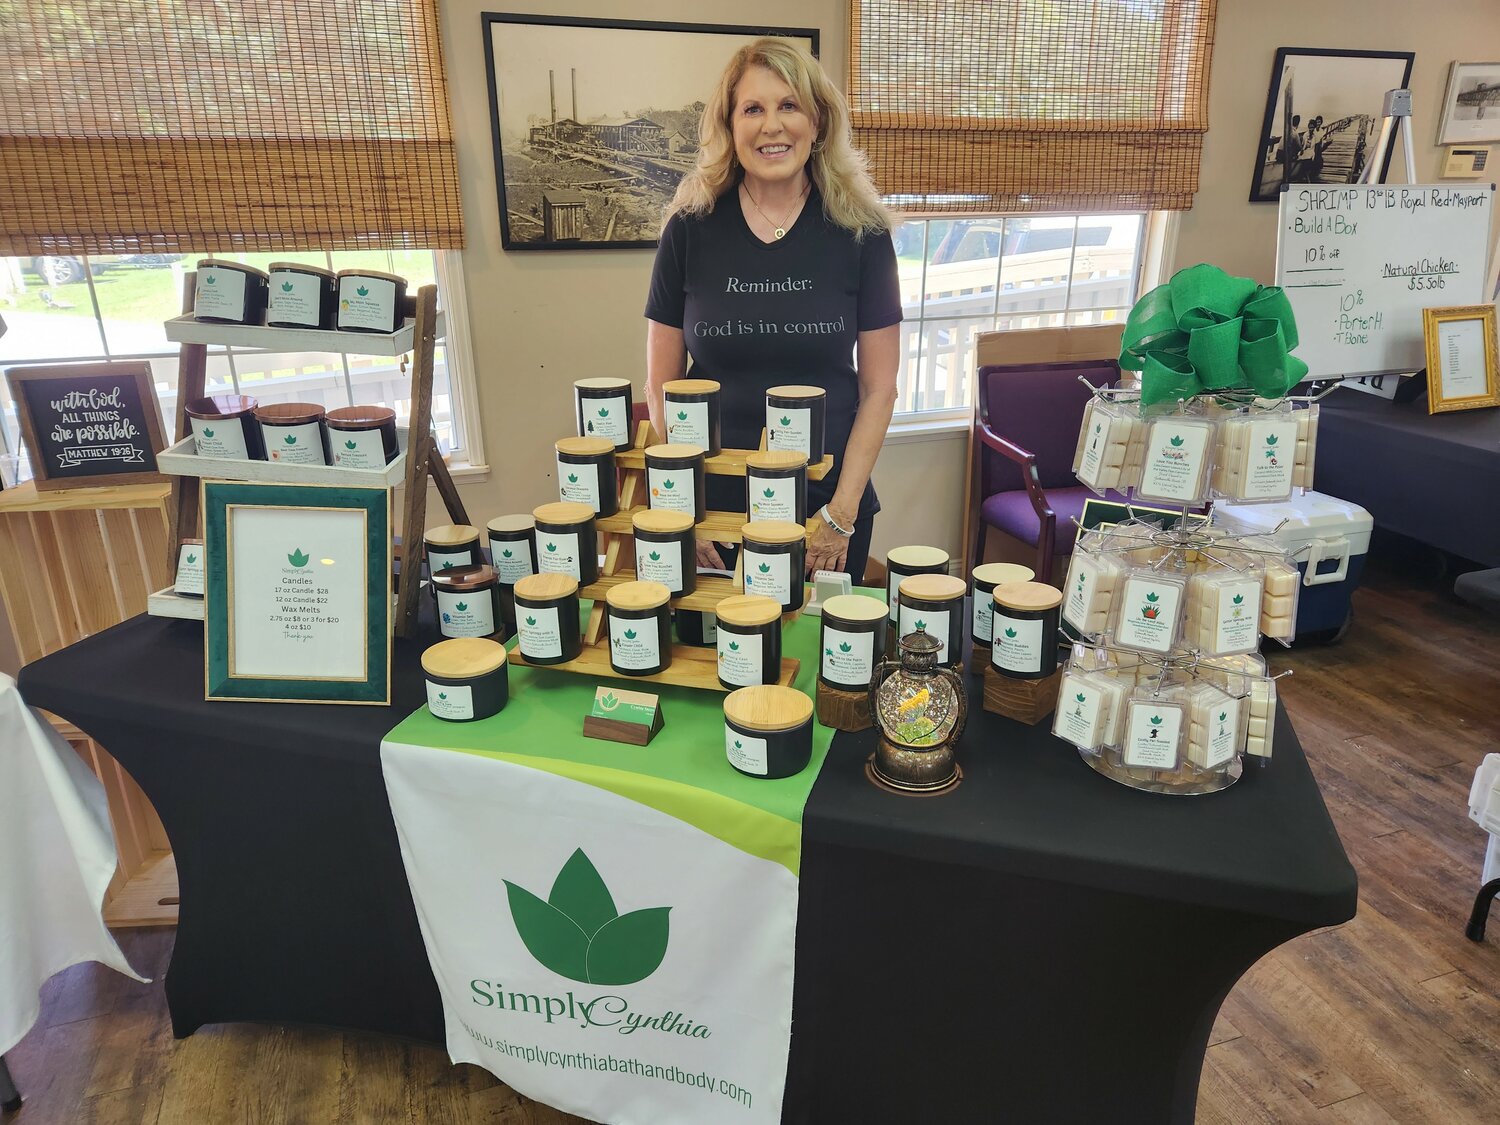 Cynthia Steers has always loved making candles and a year ago started her business Simply Cynthia and is a regular vendor at the Palm Valley Market.